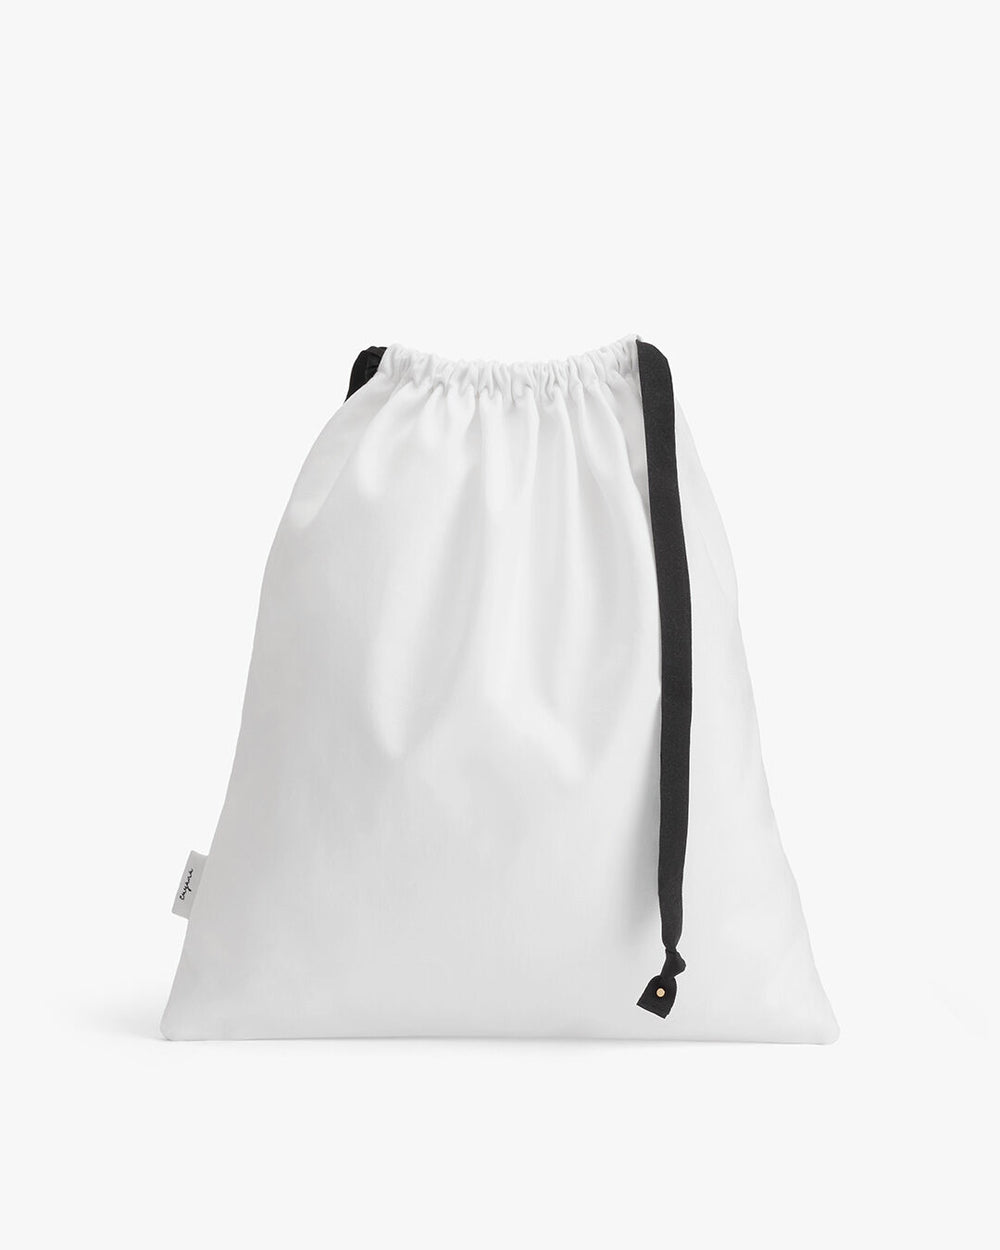 Drawstring bag with a strap on a plain background.